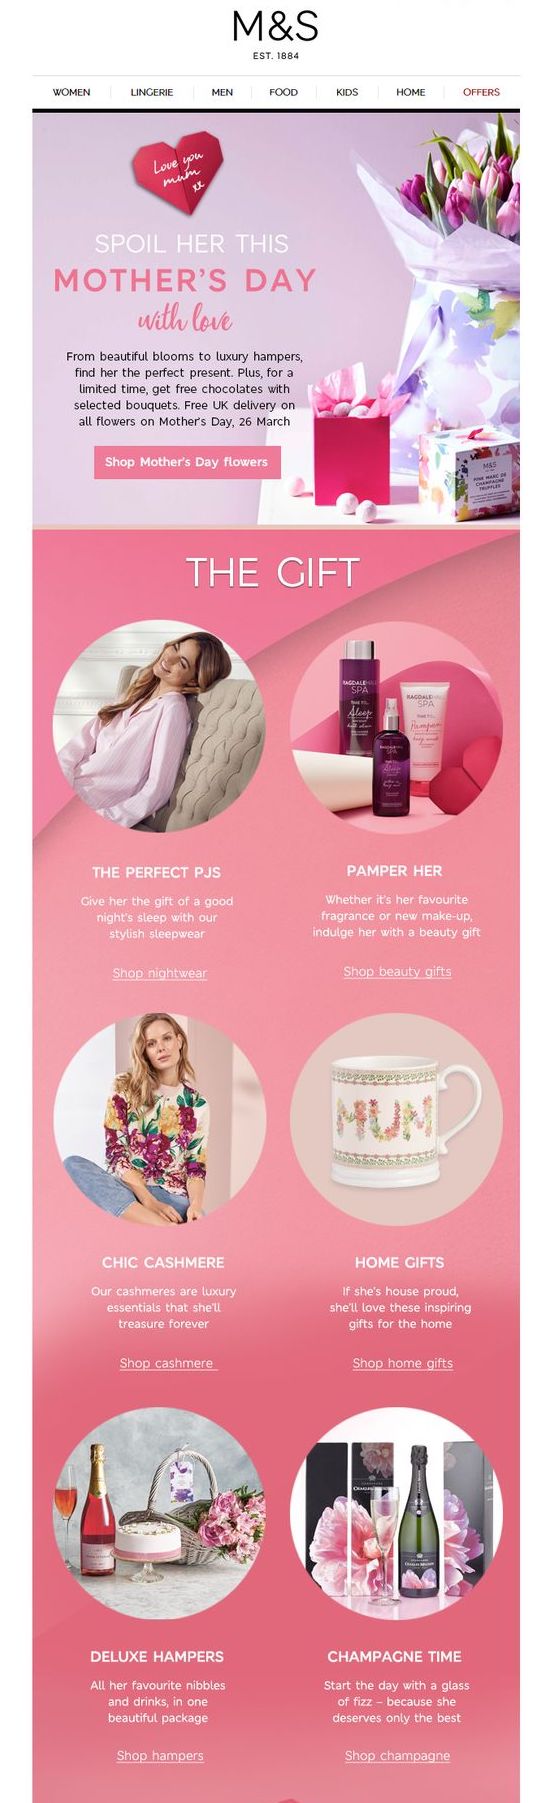 Mother's Day gift guide by Marks & Spencer